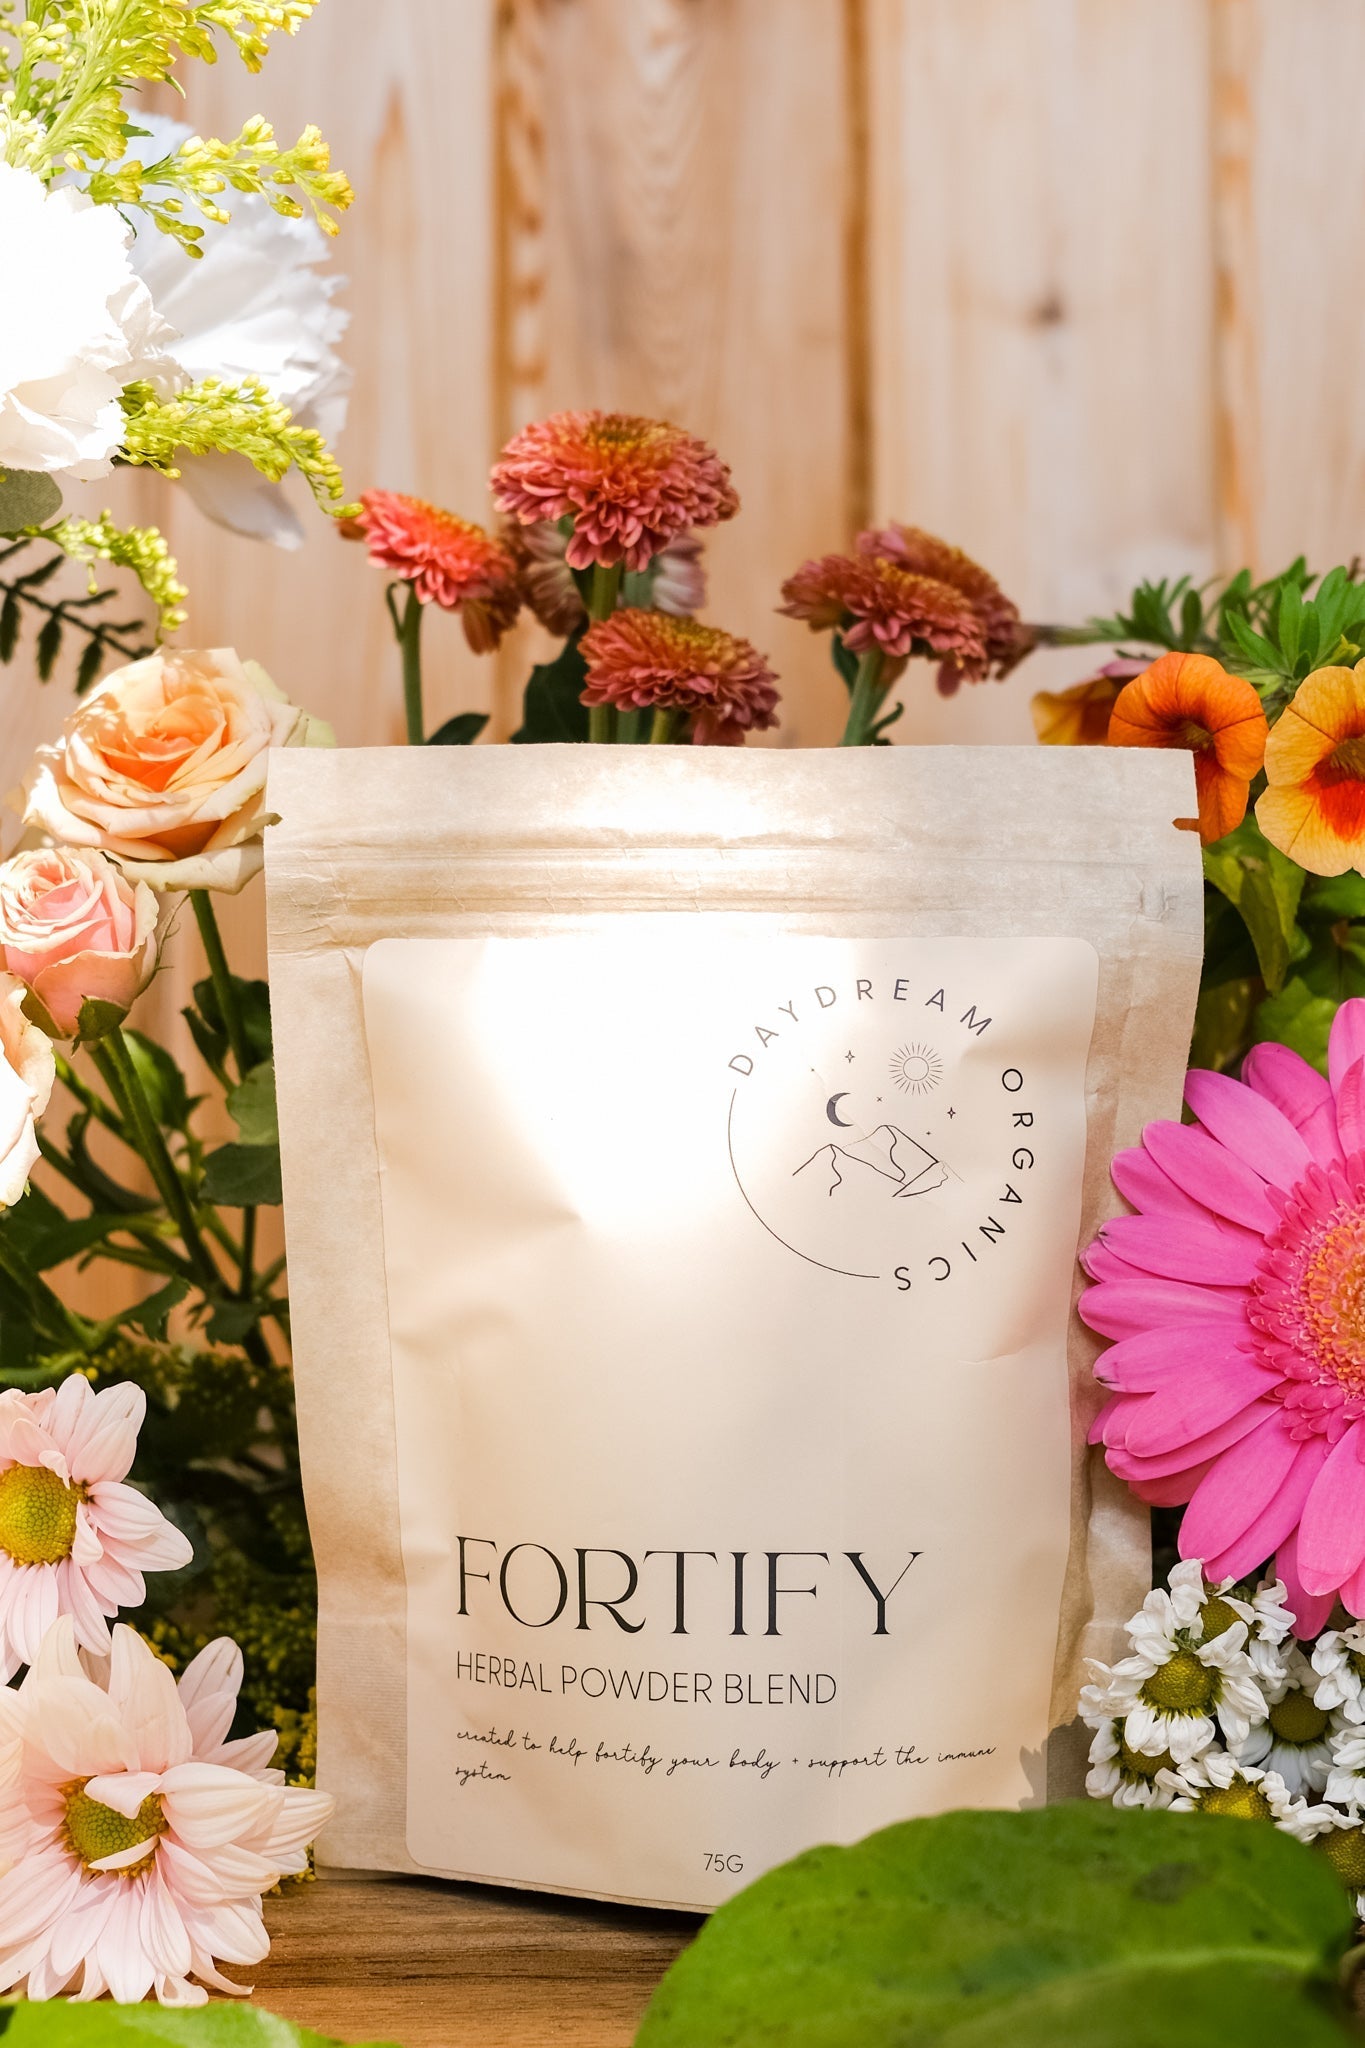 Our Fortify Herbal Powder Blend has been formulated to help you strengthen your immune system and protect your body from colds, flus and other infections.